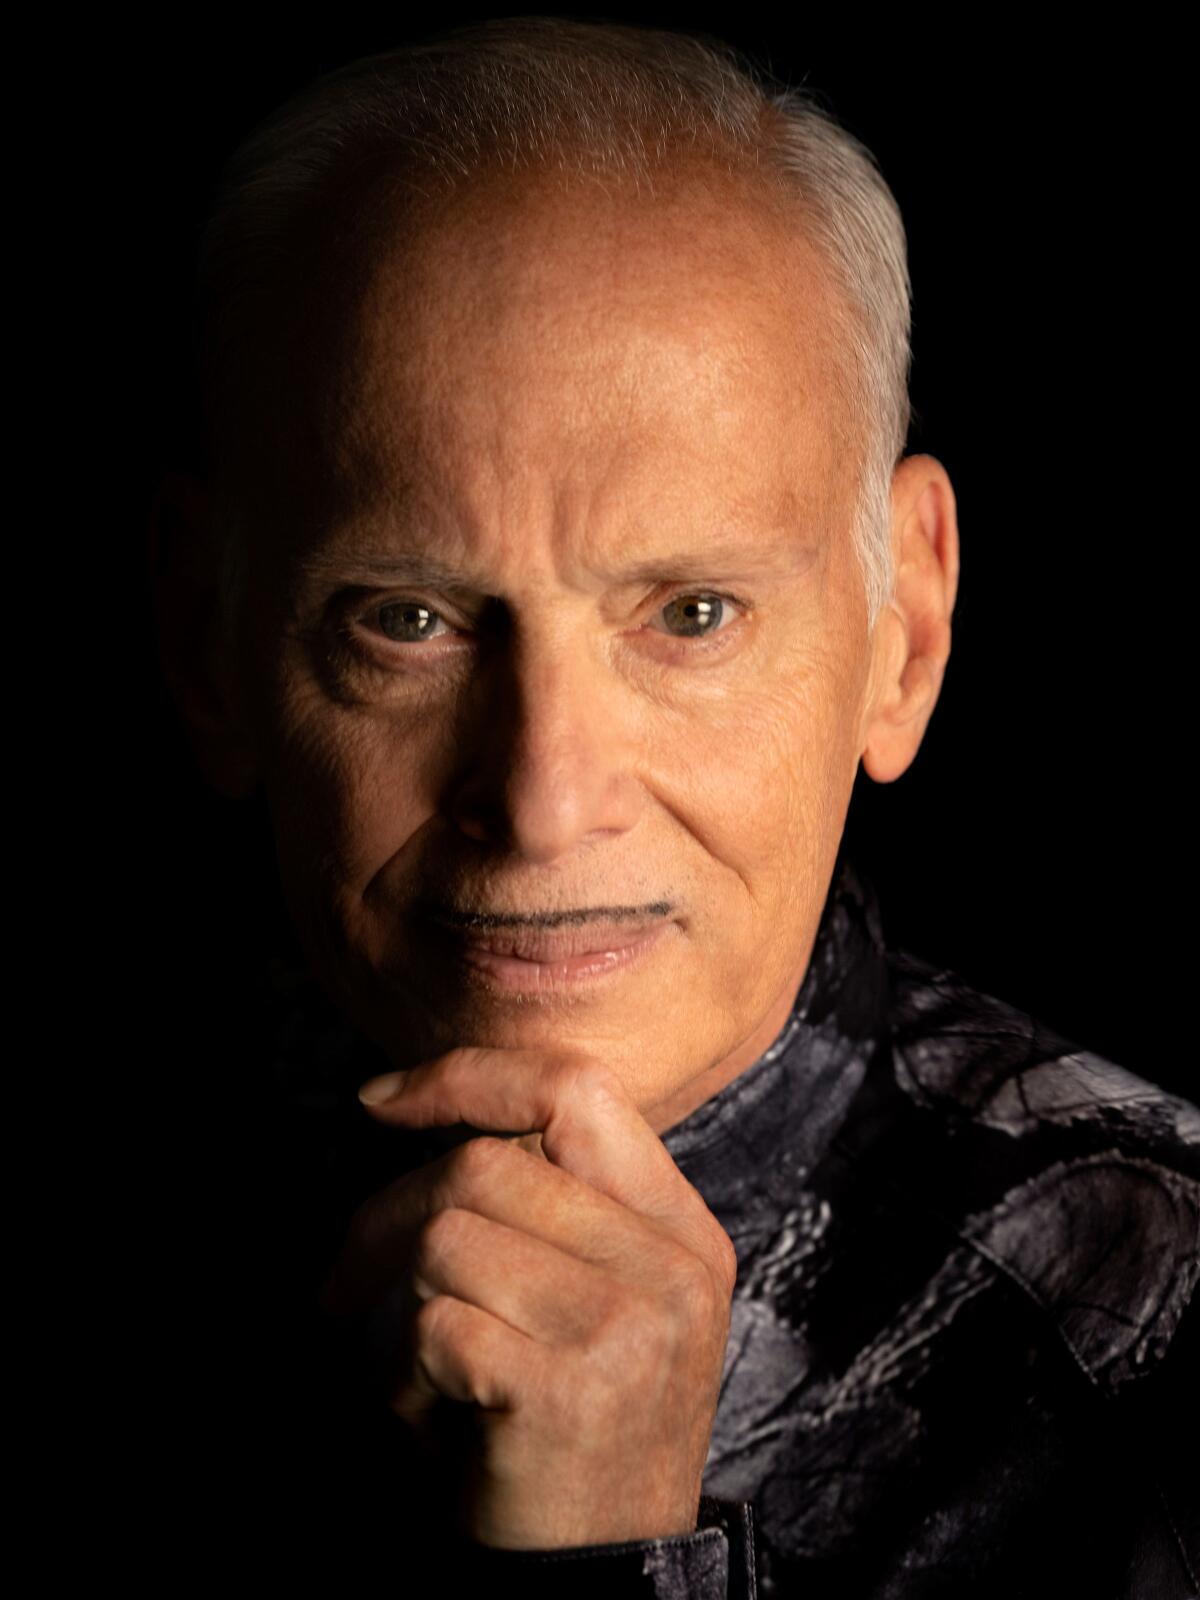 A tight headshot, with hand to chin, of John Waters.